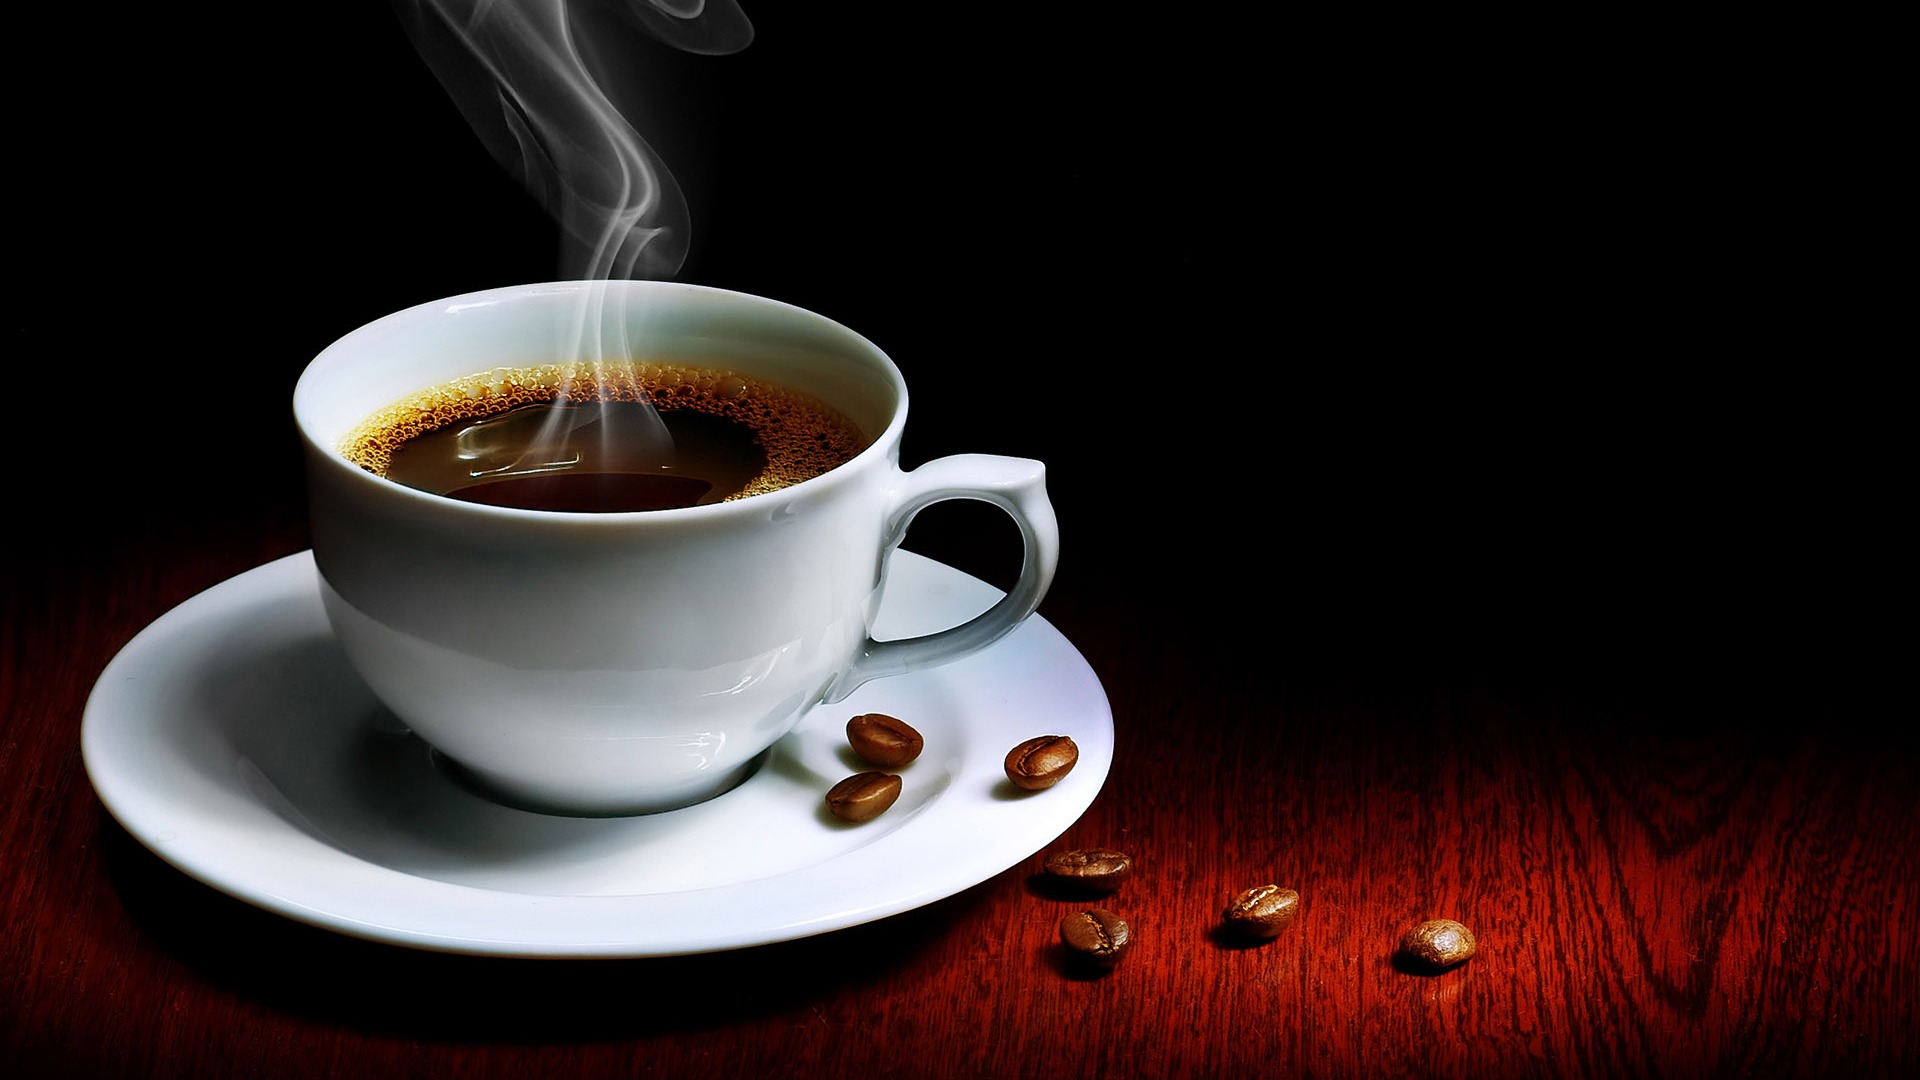 Coffee feature wallpaper (7) #20 - 1920x1080